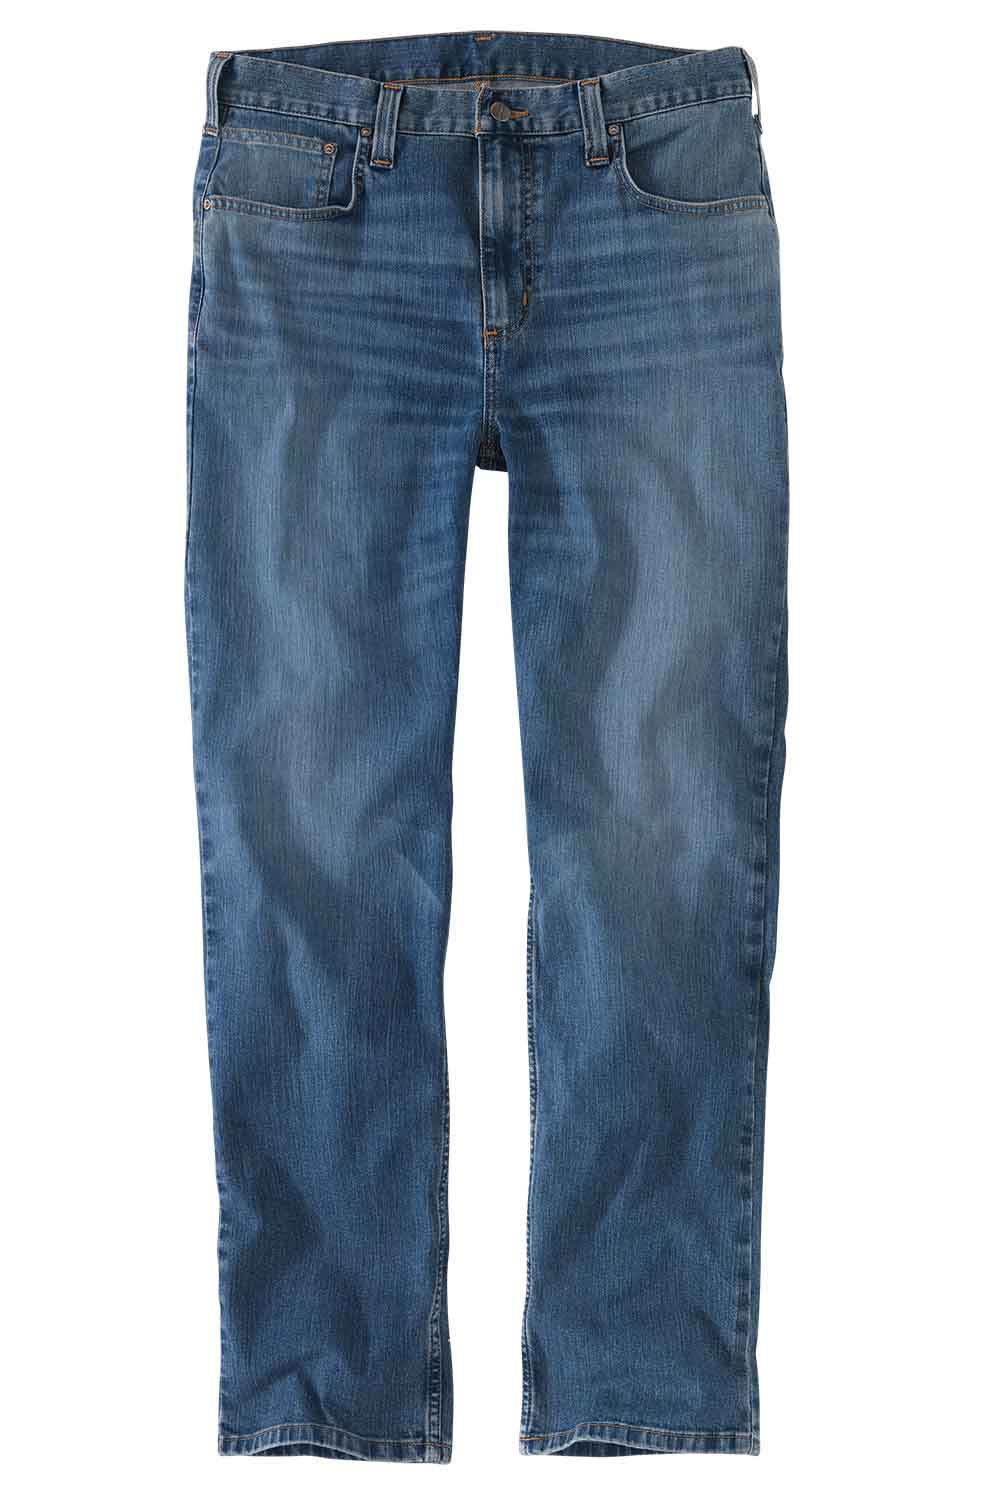 Carhartt Rugged Flex Relaxed Low Rise Five Pocket Tapered Jeans for Me –  Glik's